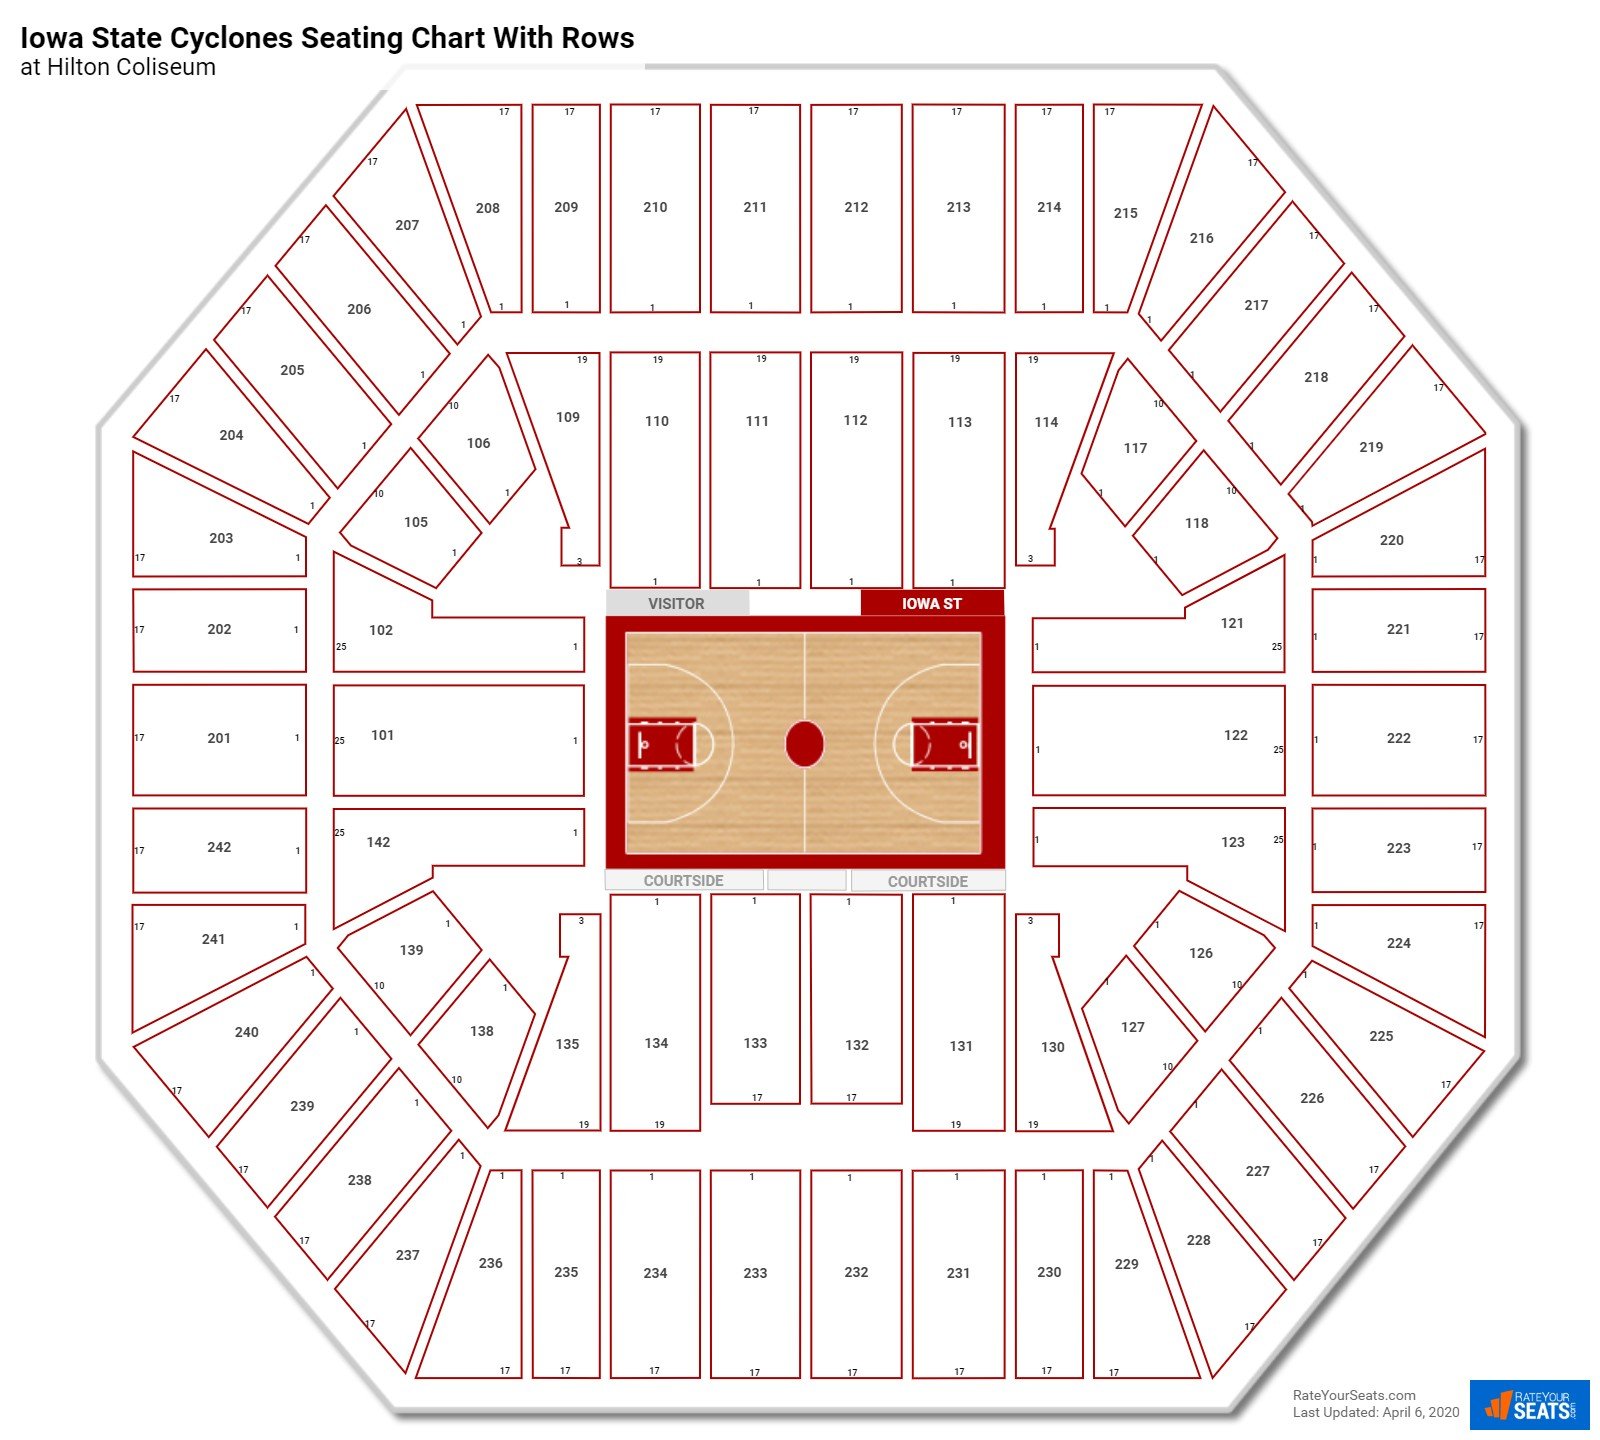 Hilton Coliseum seating chart with row numbers